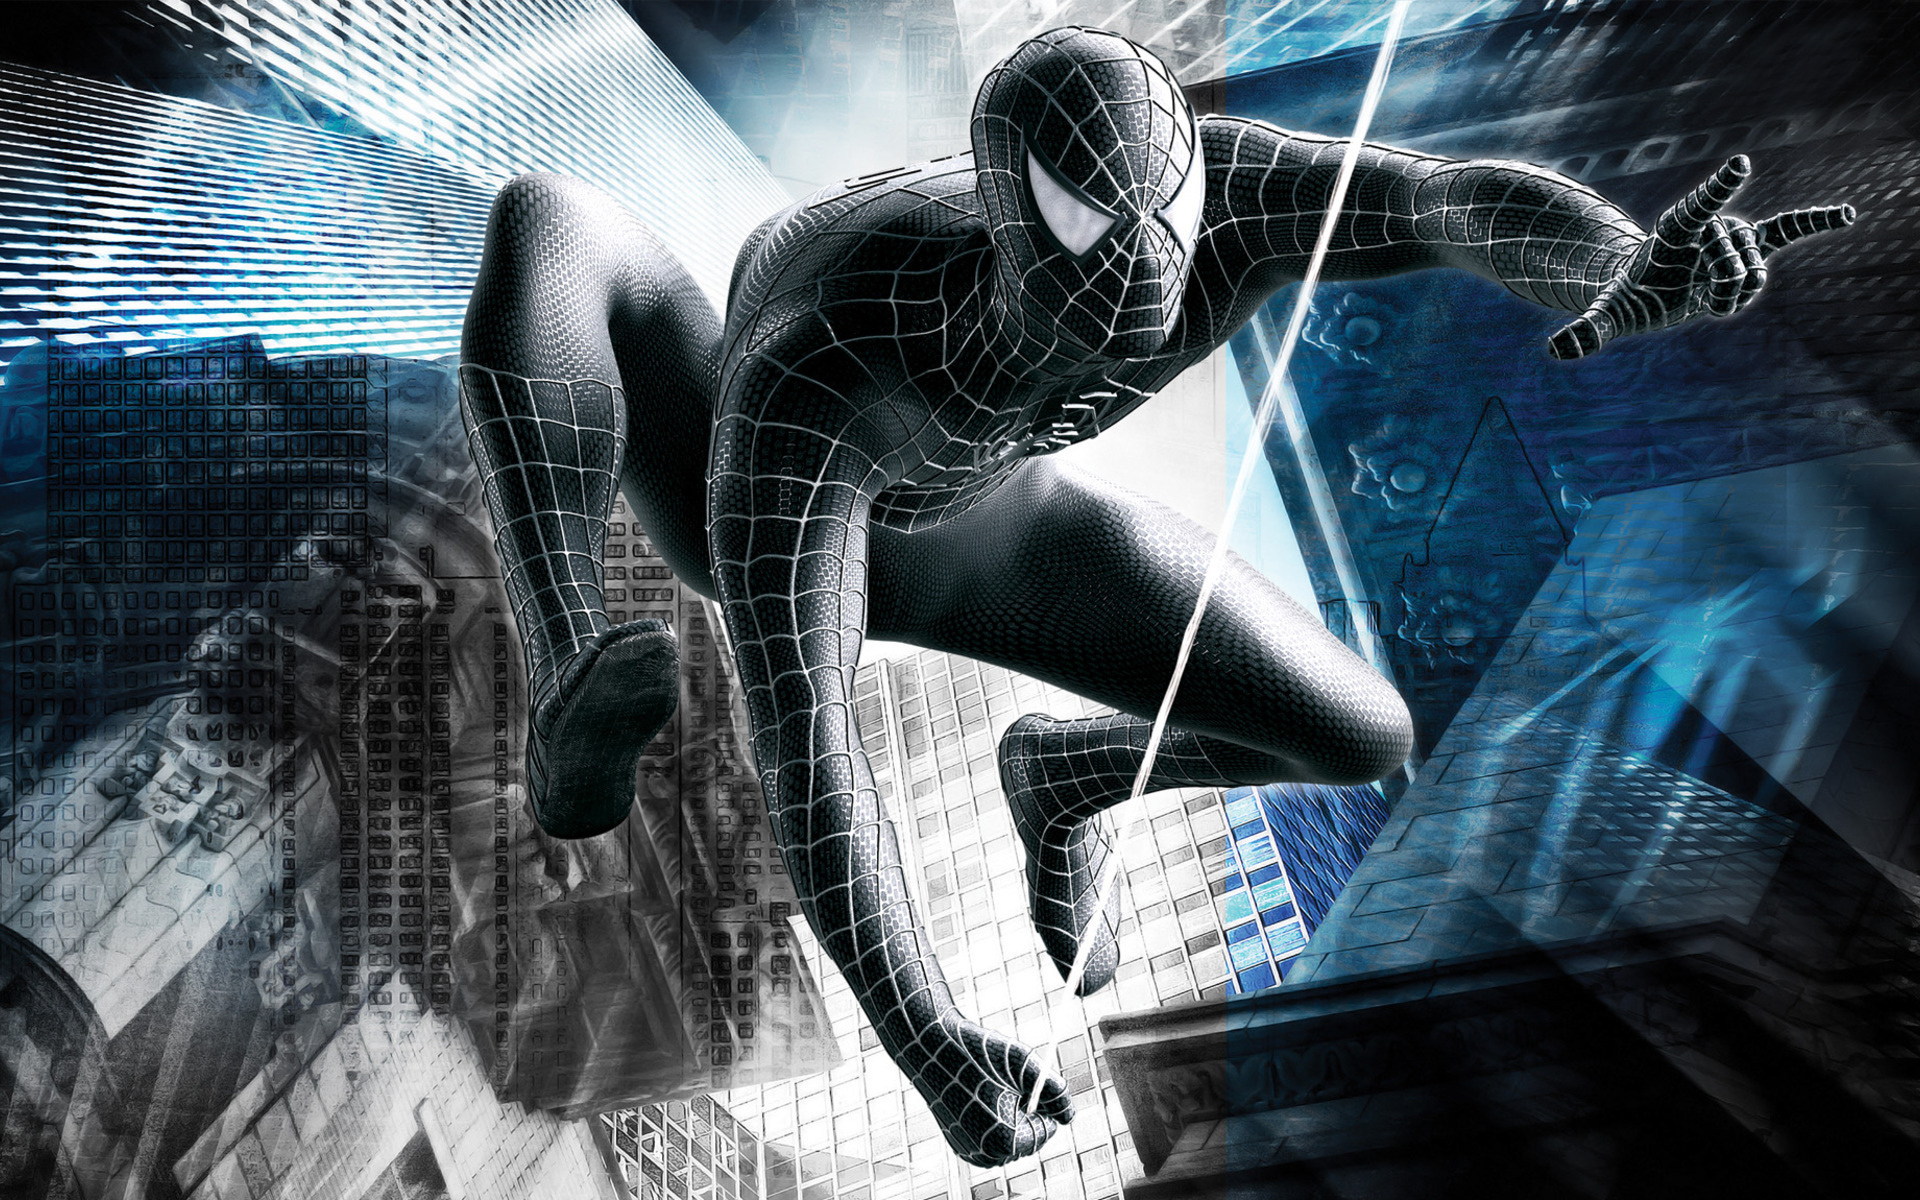 Spider Man 3 HD Wallpapers | HD Wallpapers